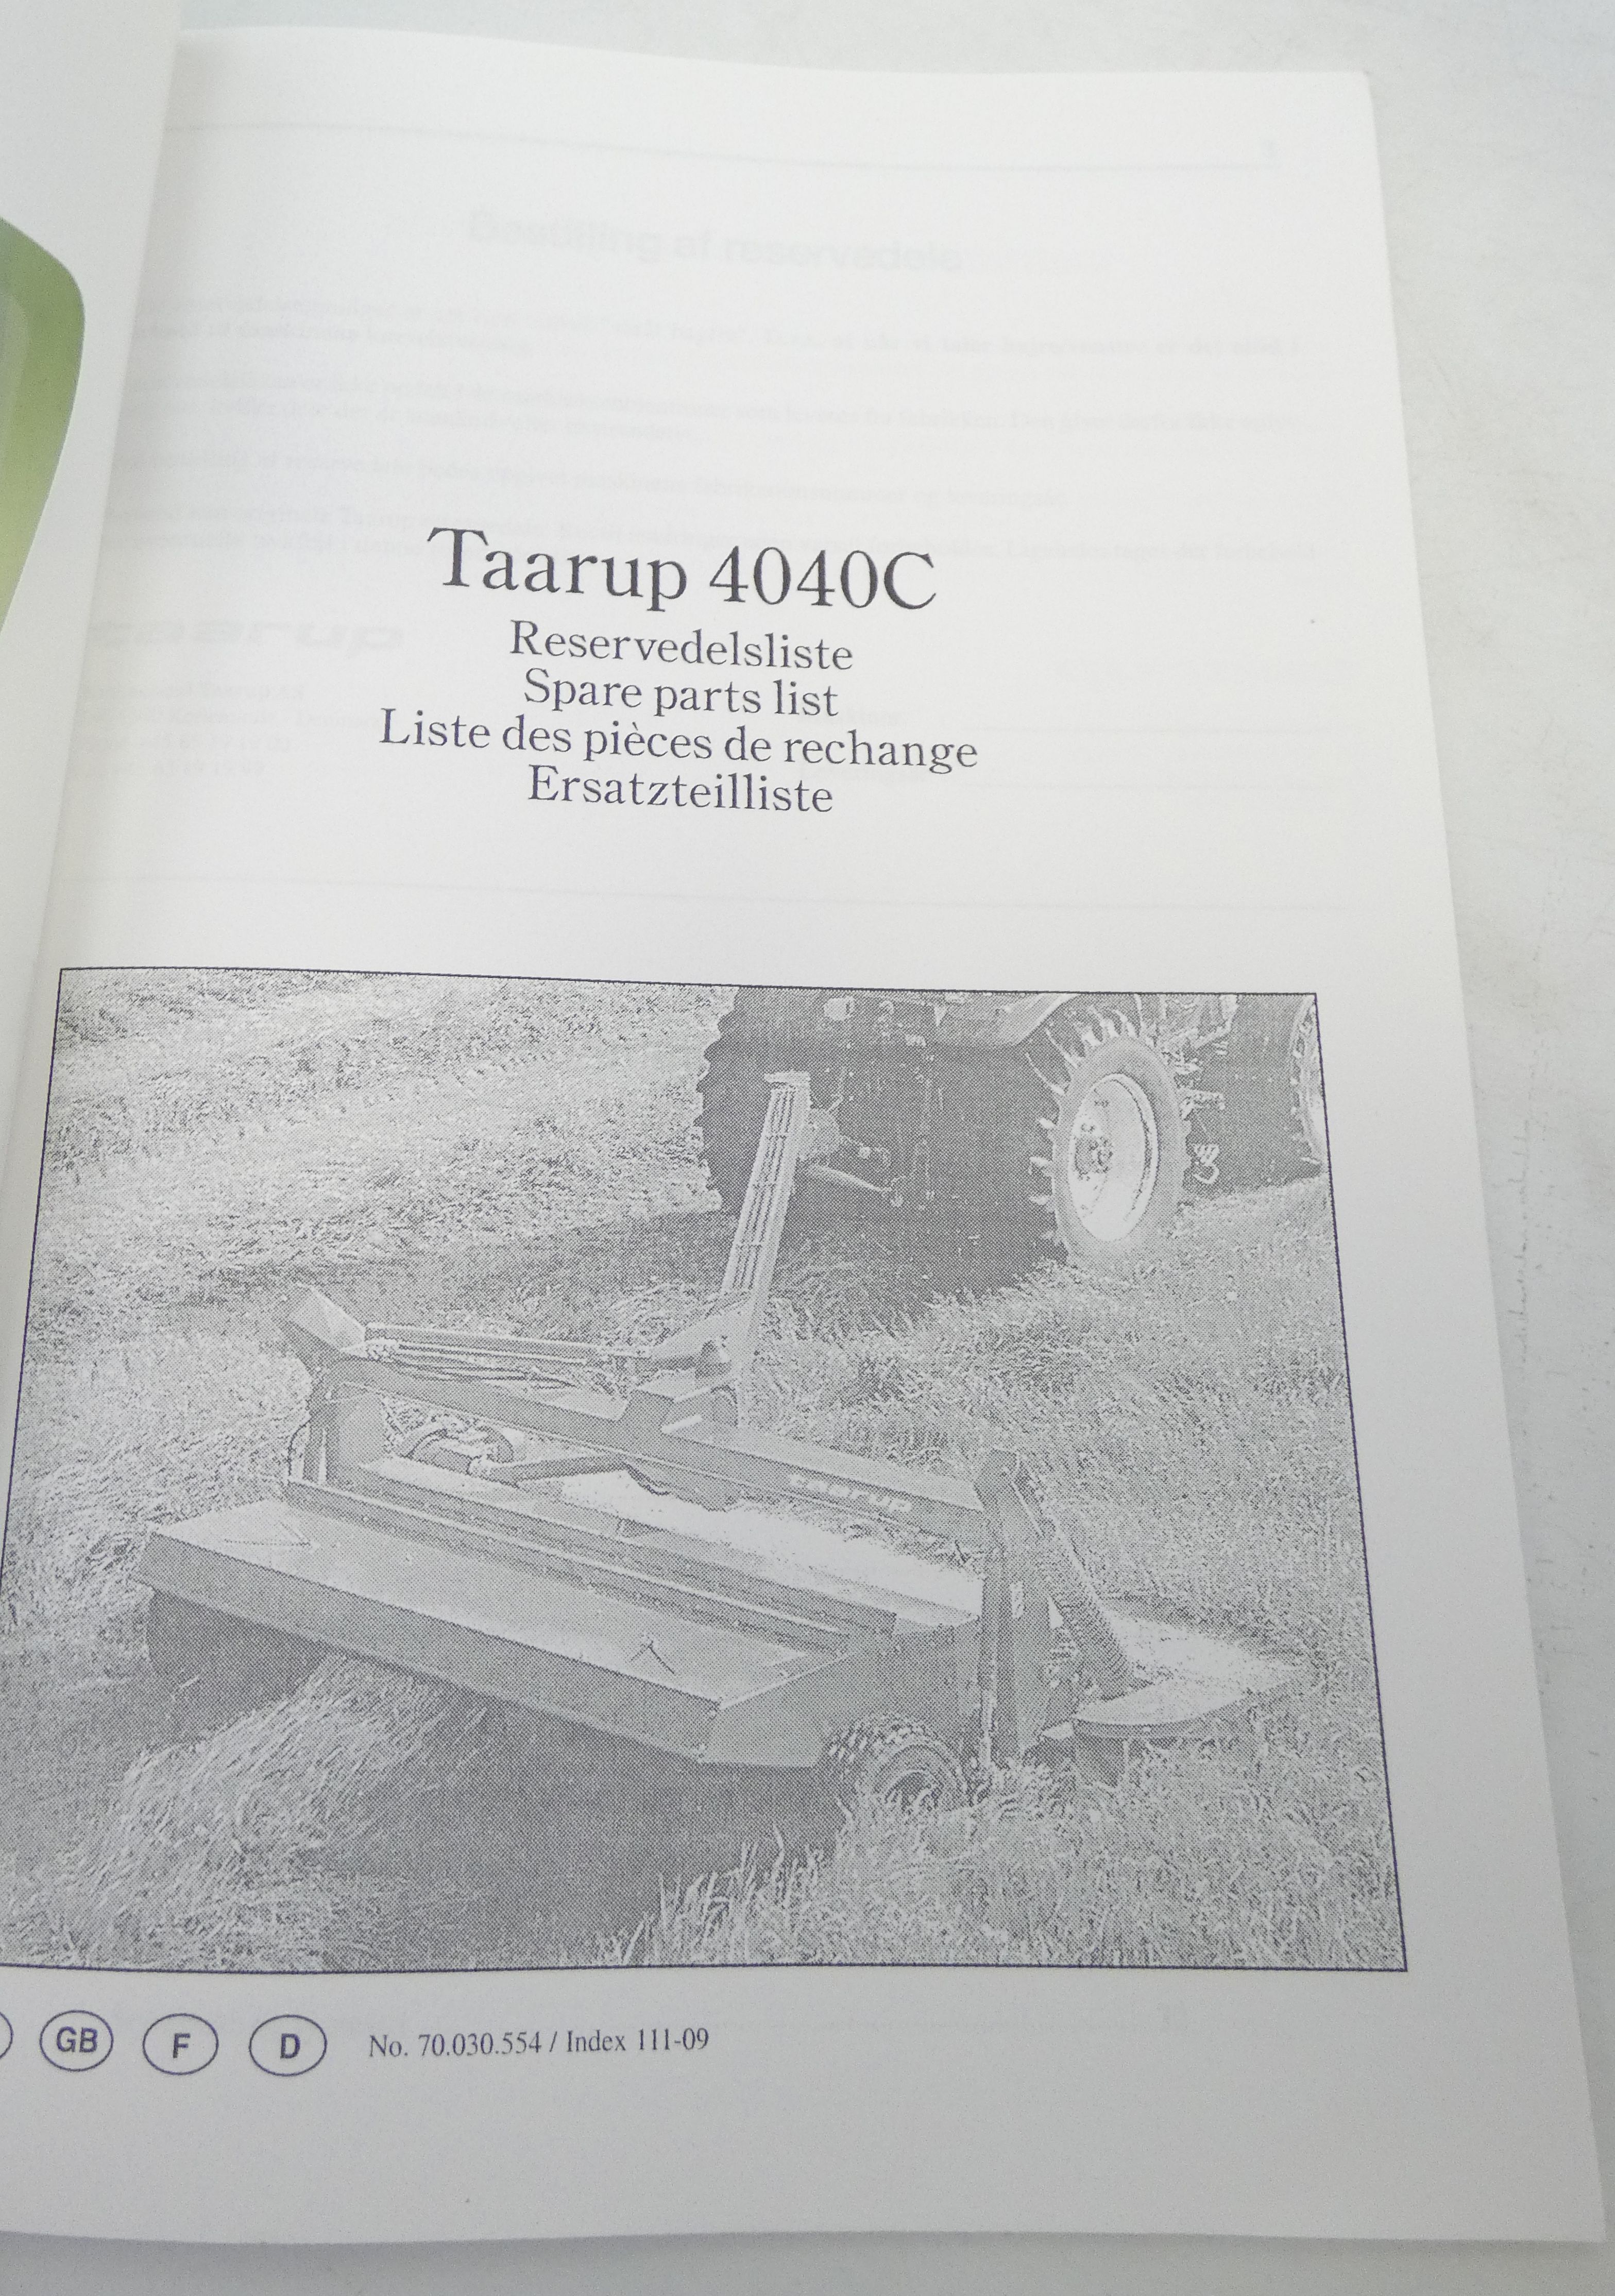 Taarup 4040C spare parts list